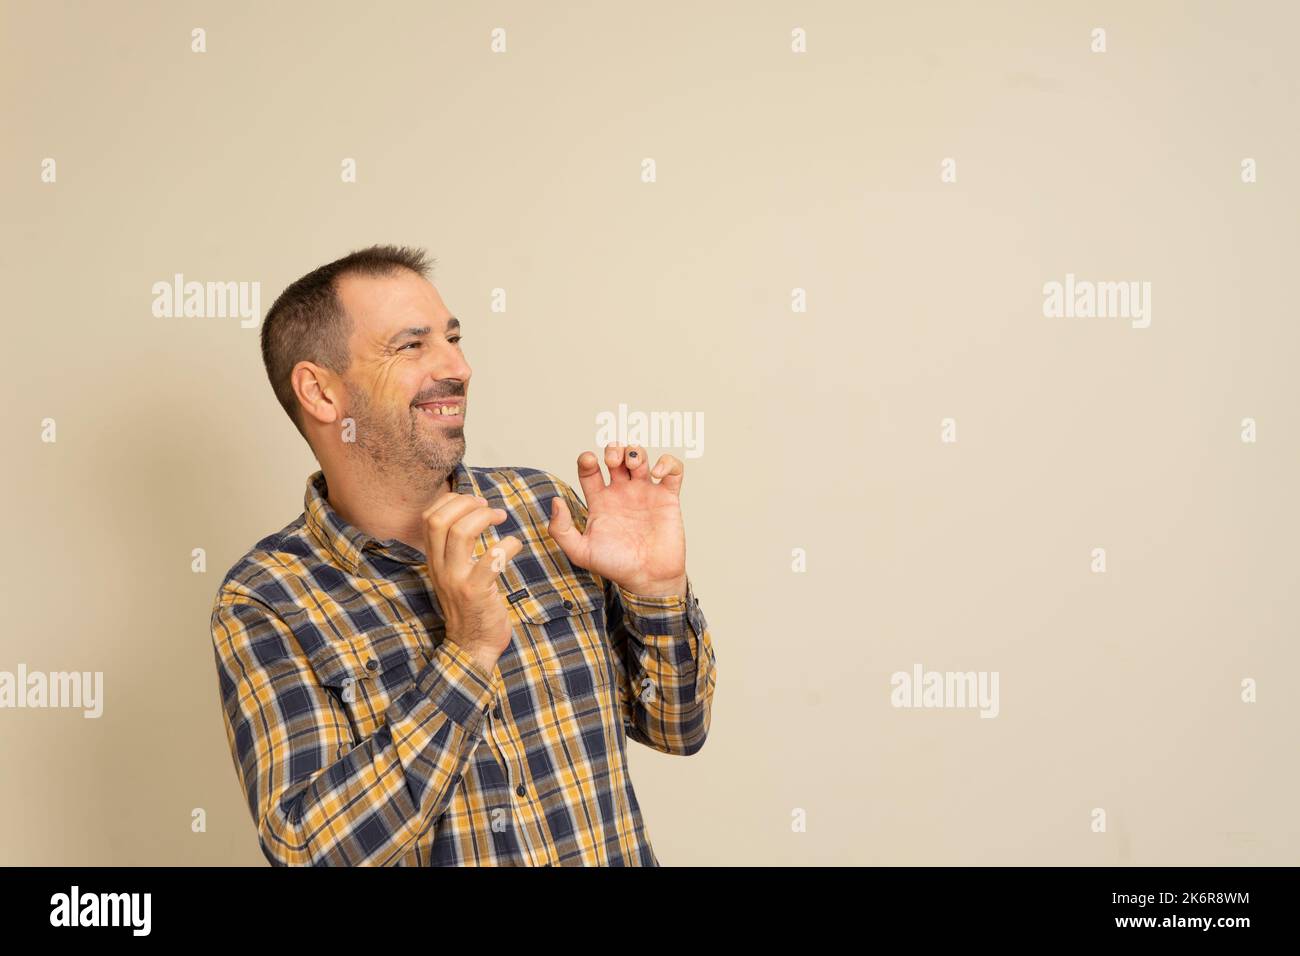 Hispanic man with a beard nervously playing with his hands. Shame. Isolated beige background. Negative emotions facial expression feeling Stock Photo